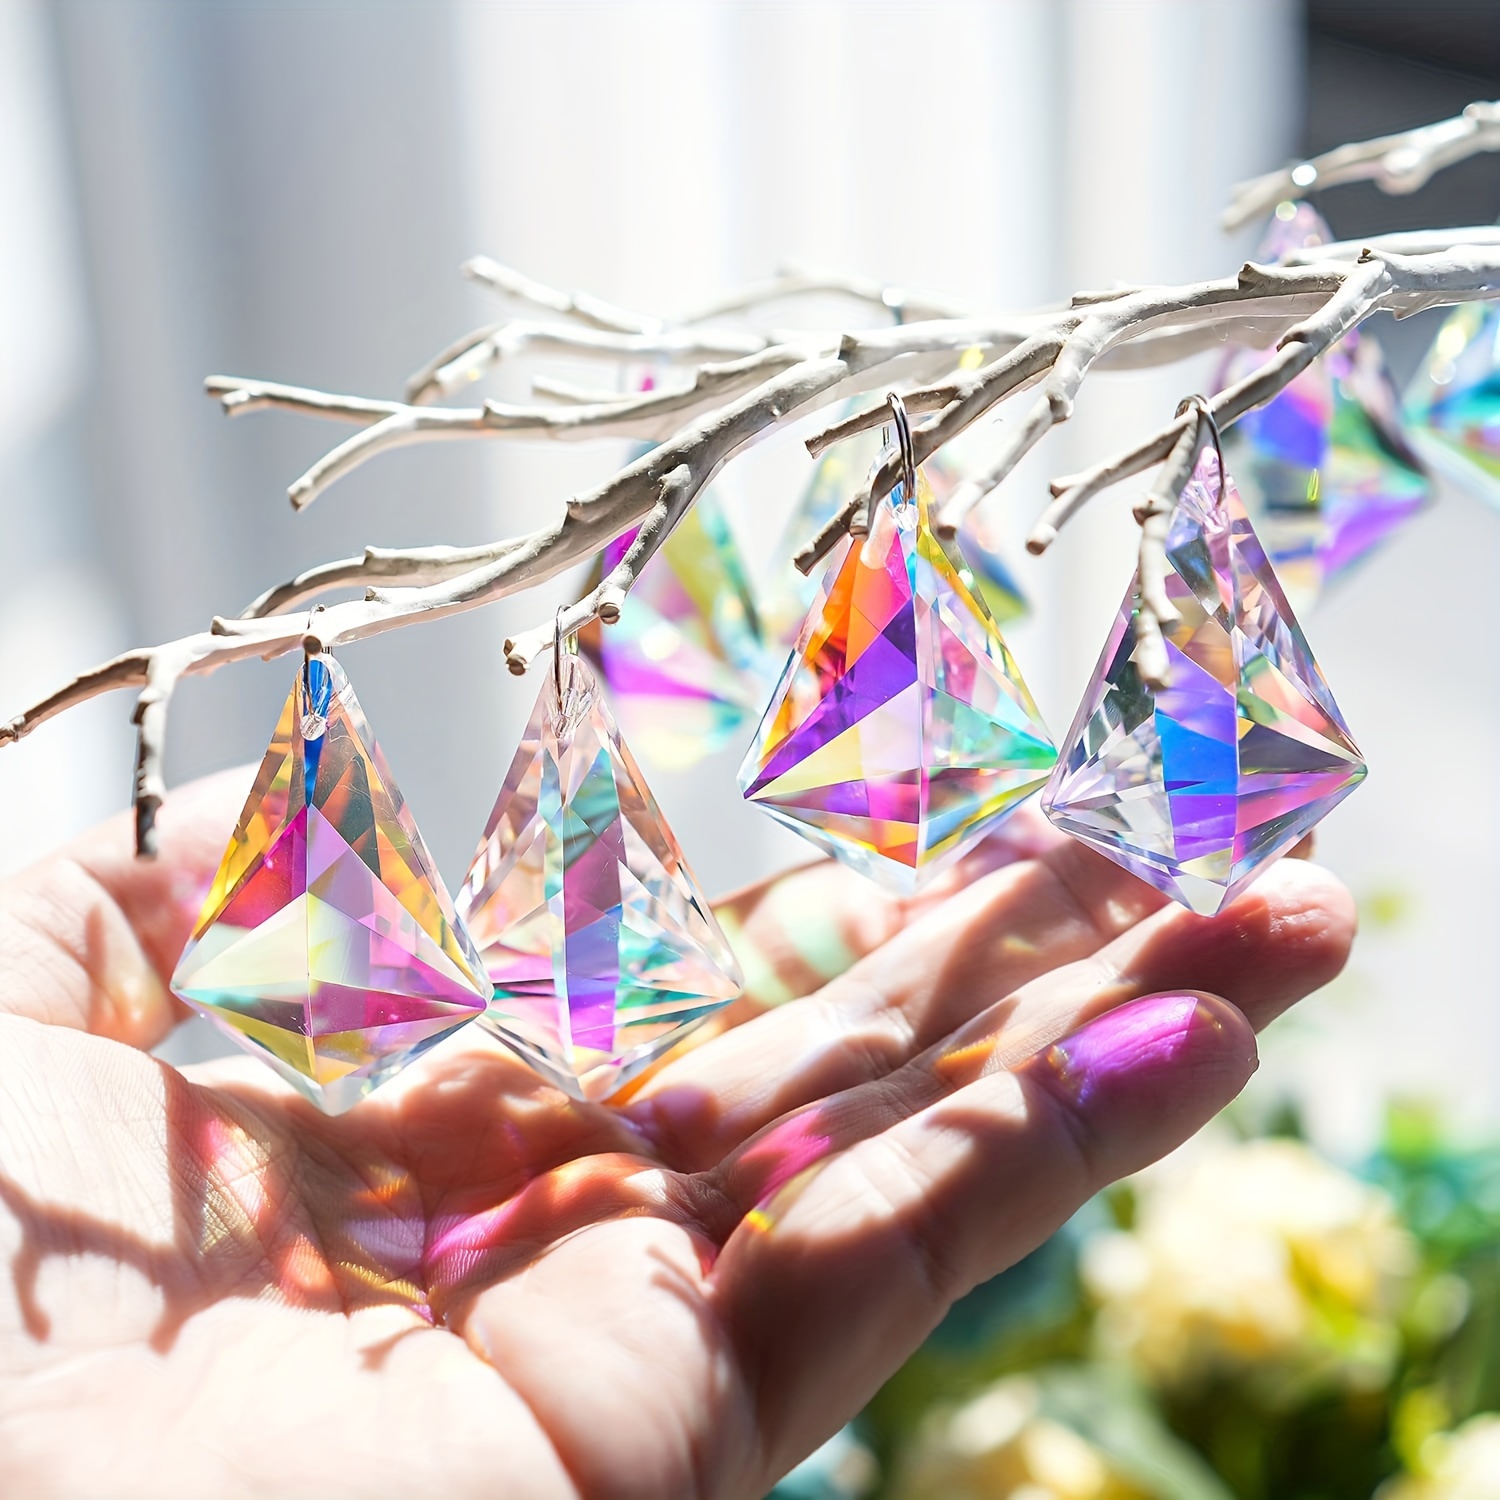 

10pcs Colorful Crystal Suncatchers, 50mm Rainbow Pendant Window Prisms, Crystal Glass Hanging Ornaments, Home Garden Wedding Diy Decors, 1.9 Inches